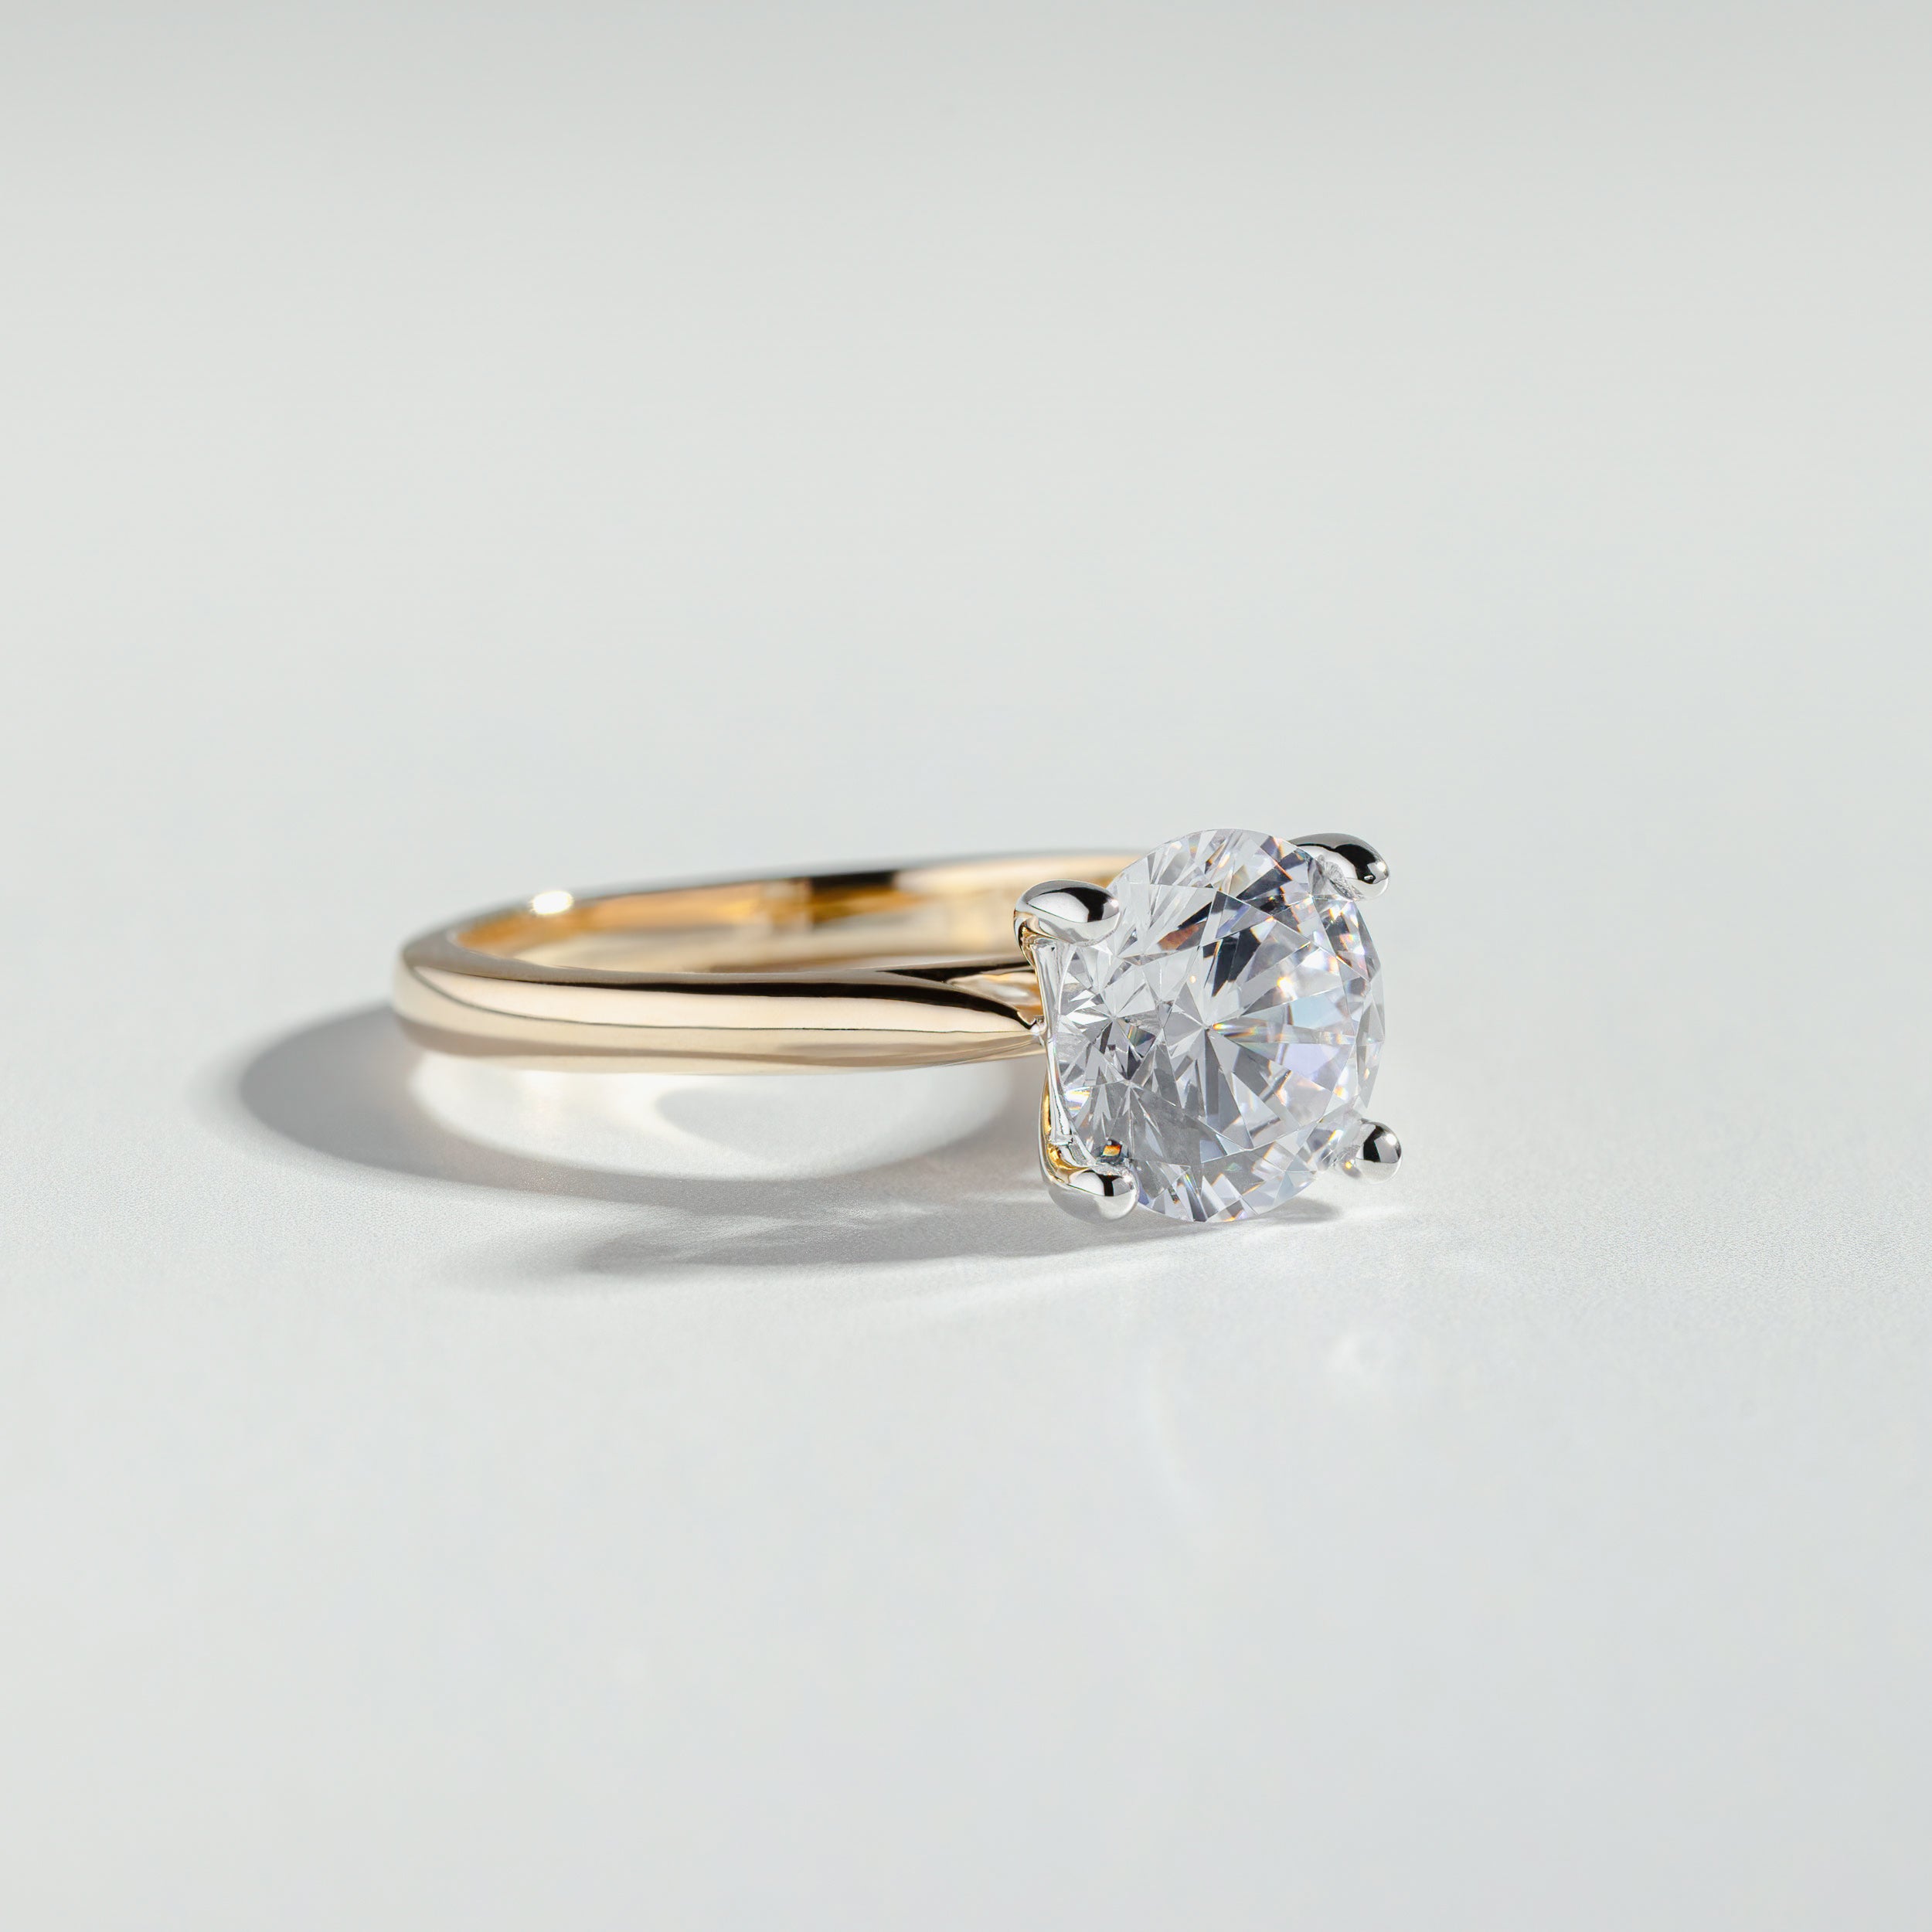 The Round Cut Two-Tone Diamond Solitaire Ring